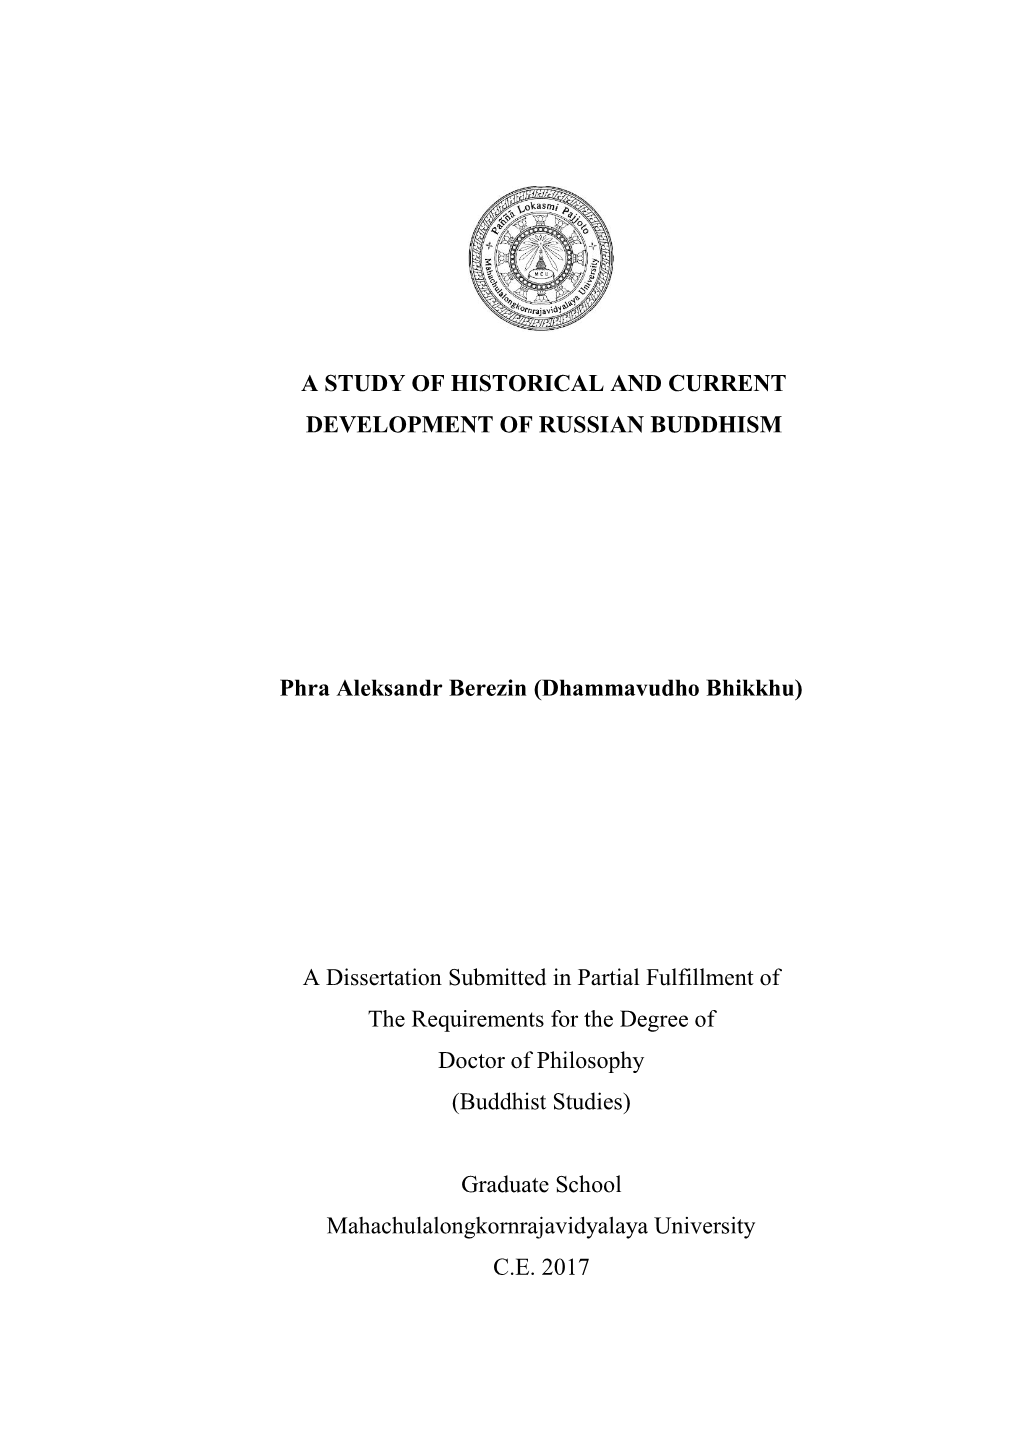 A Study of Historical and Current Development of Russian Buddhism